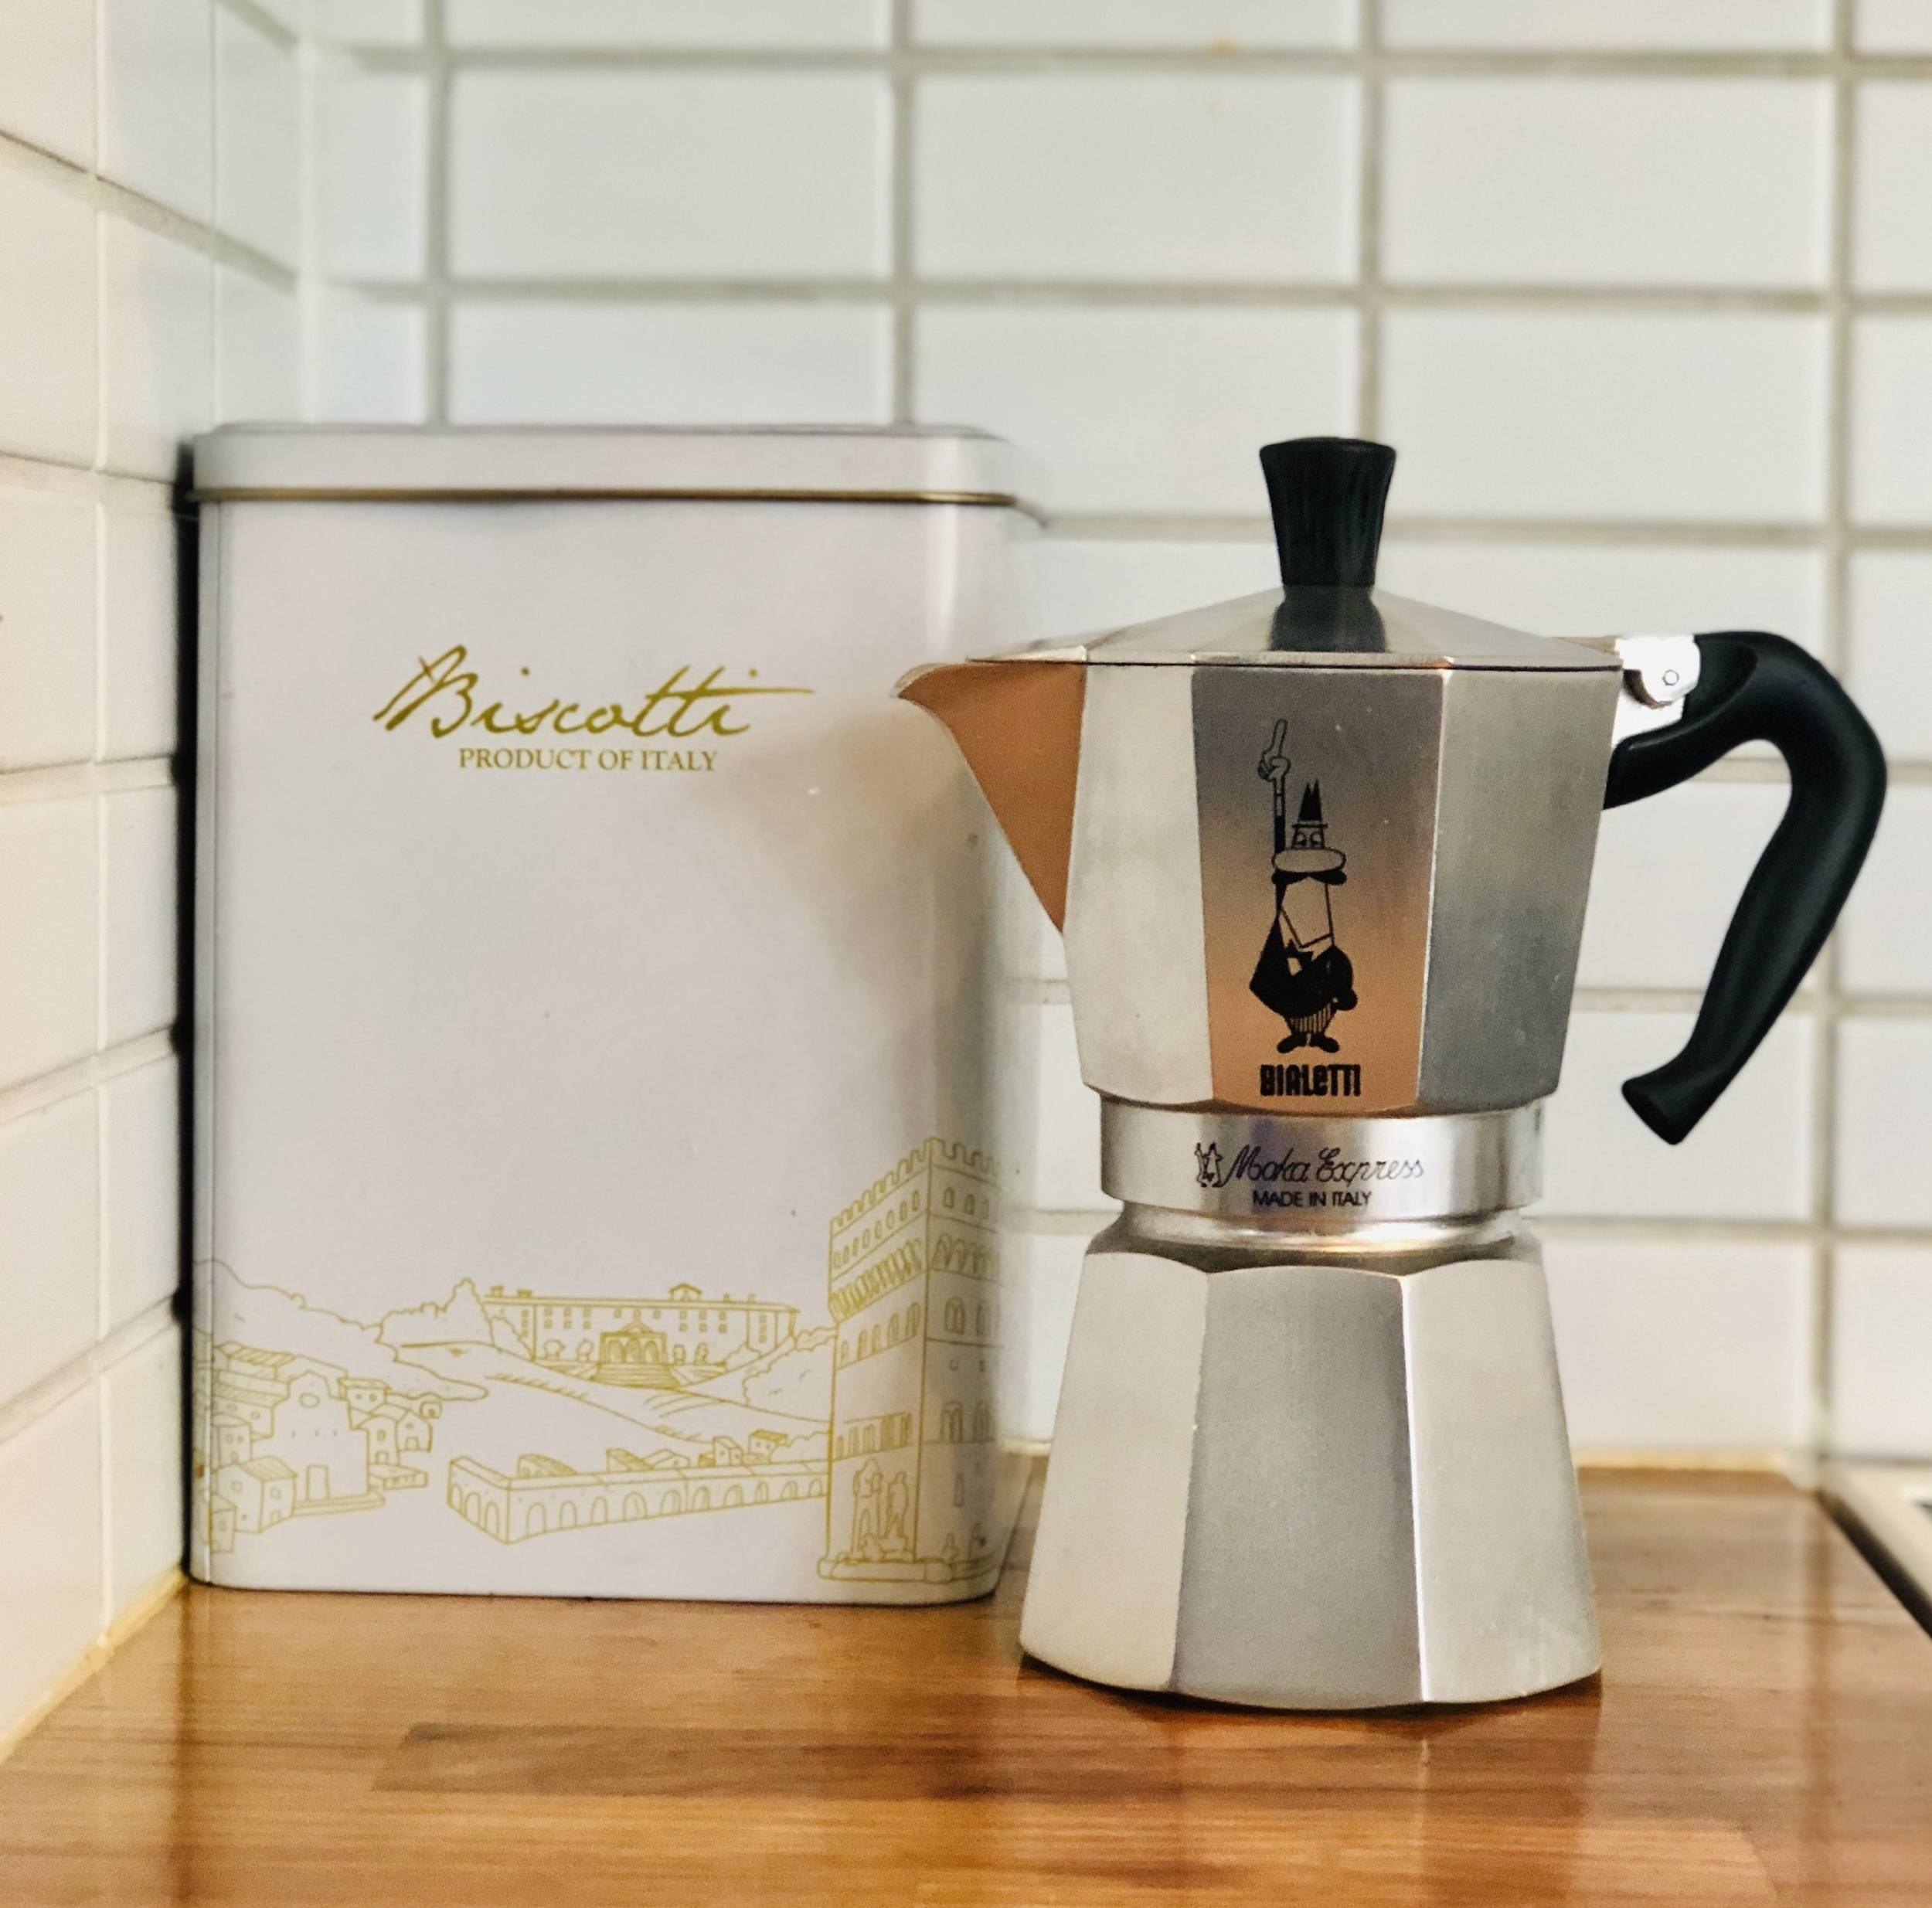 How To Use Bialetti Stove Top Espresso Maker For Perfect Latte At Home Skimbaco Lifestyle Online Magazine